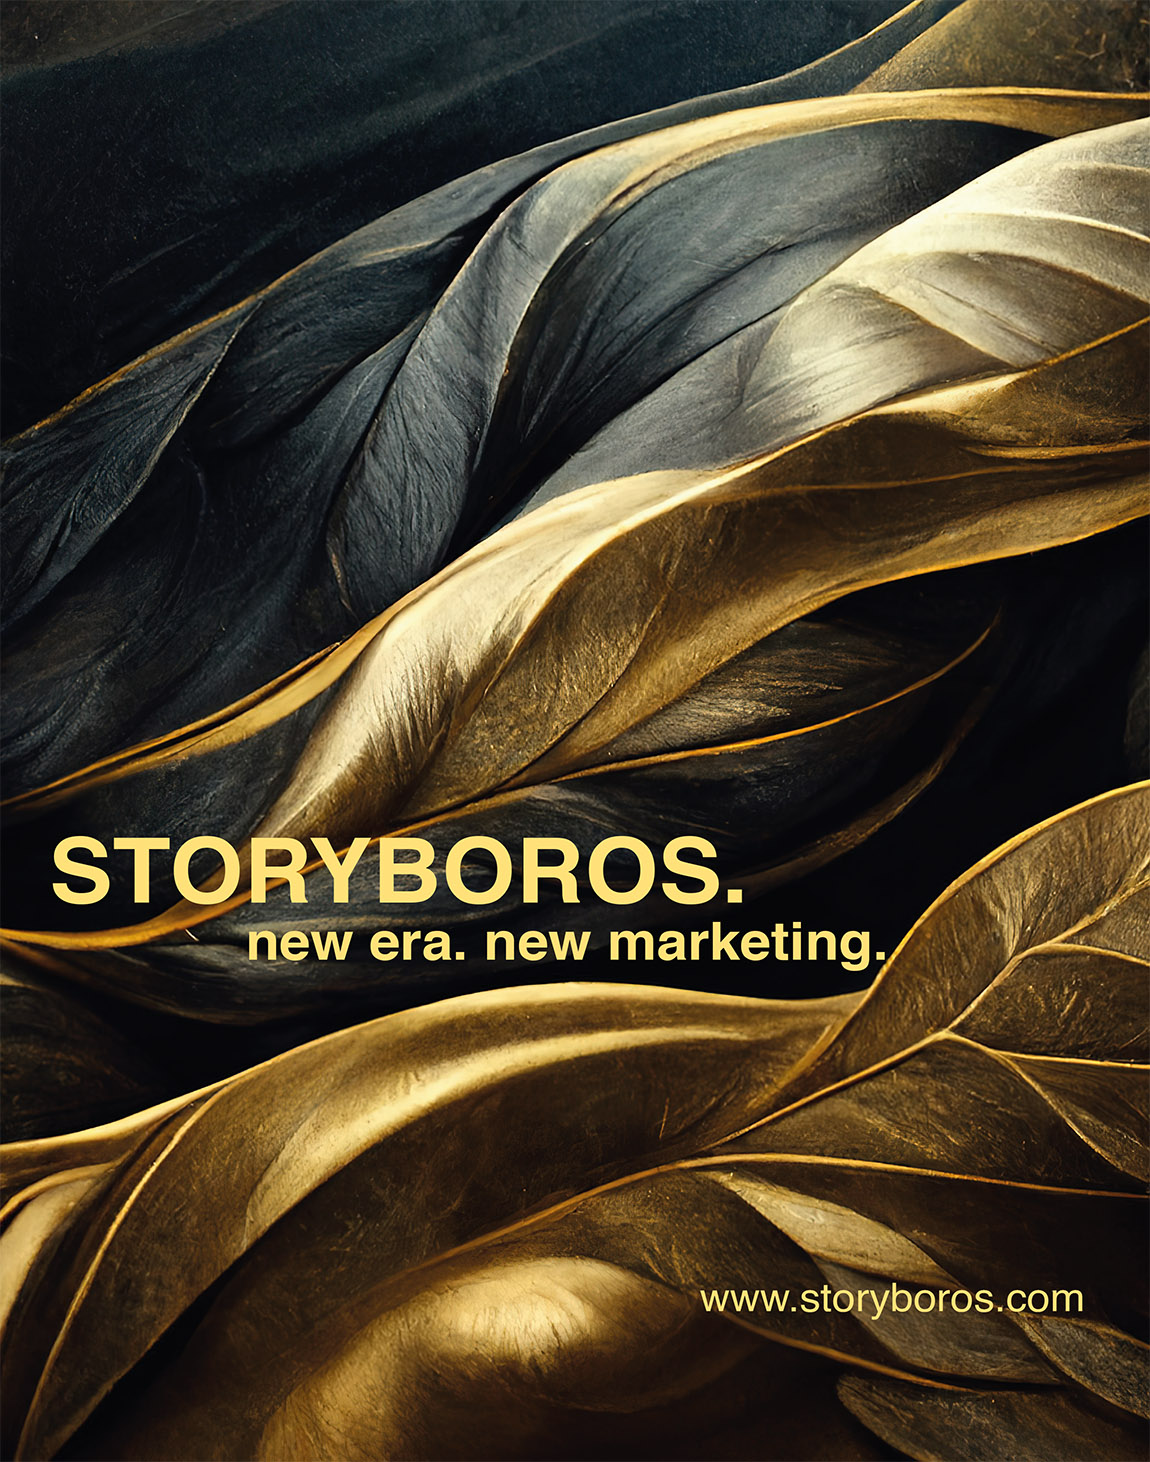 STORYBOROS: Standing out from the crowd